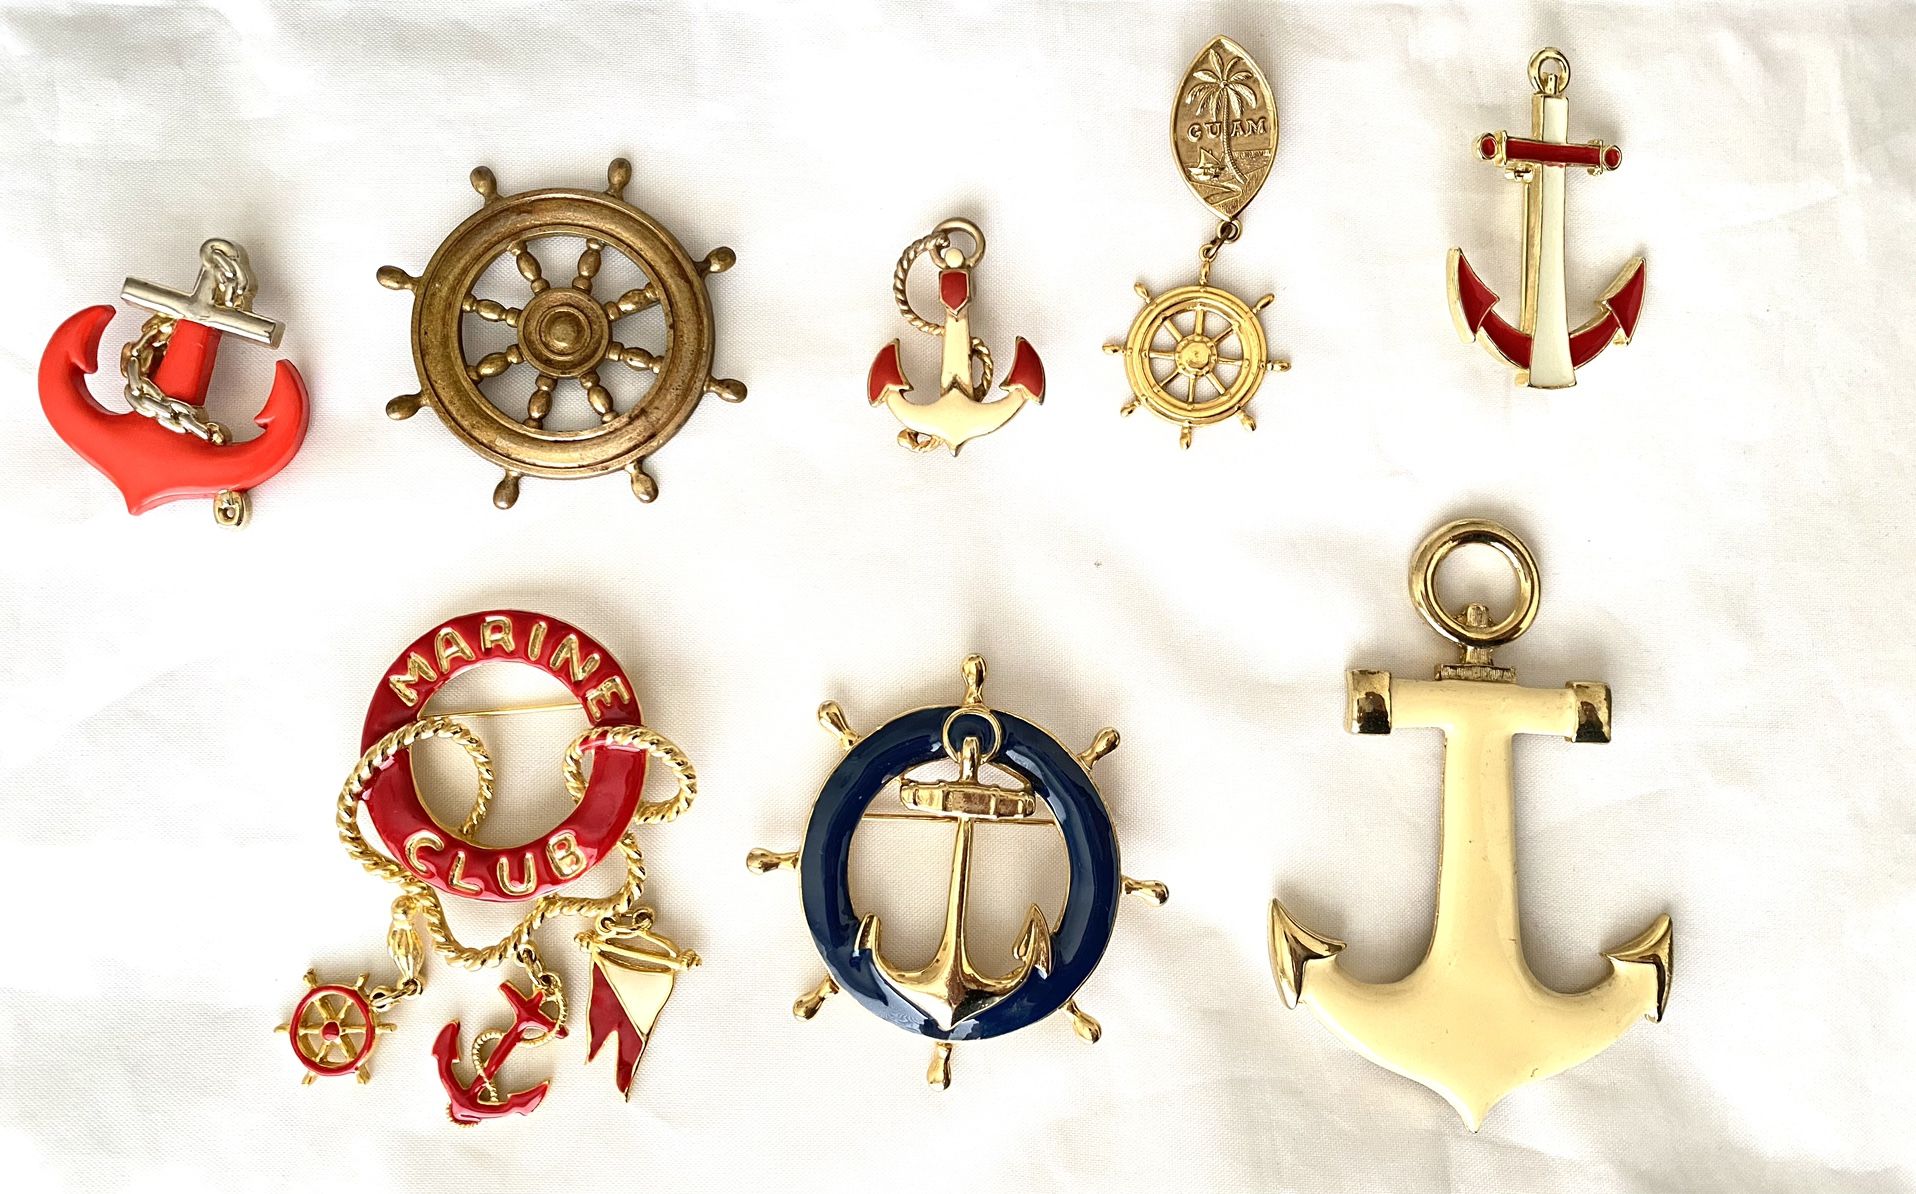 Gold Tone Nautical Themed Brooch Lot